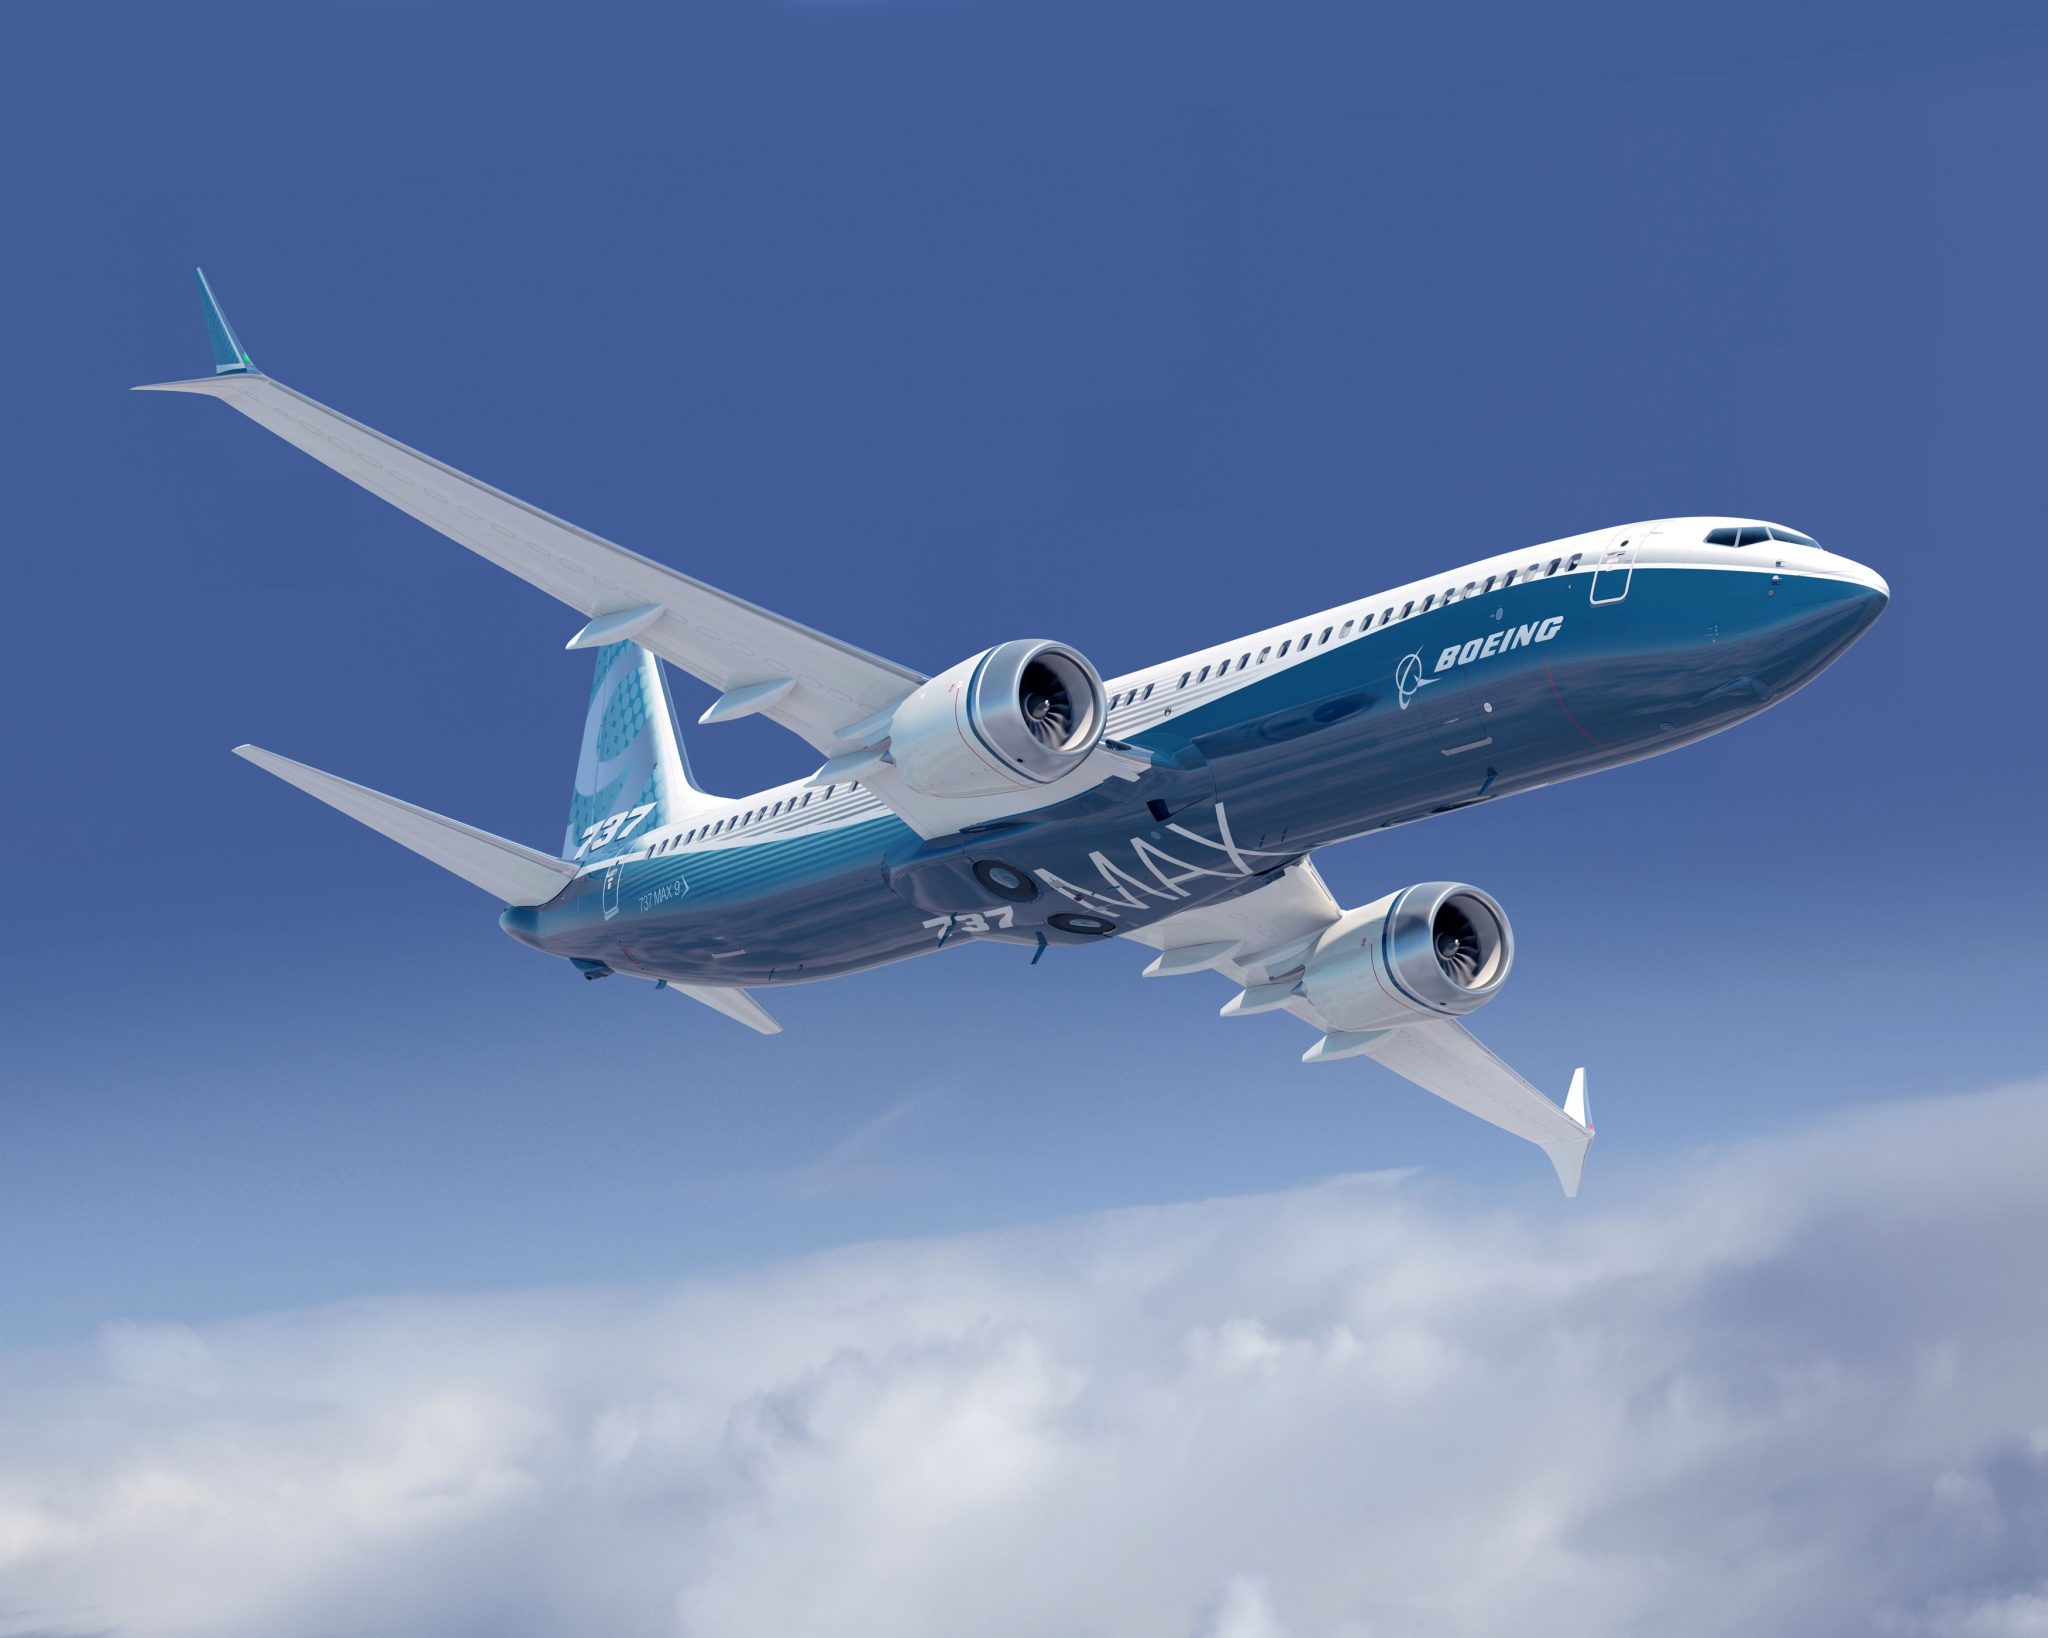 ST Engineering signs multi-year MRO contracts with South Korean airline T’way Air